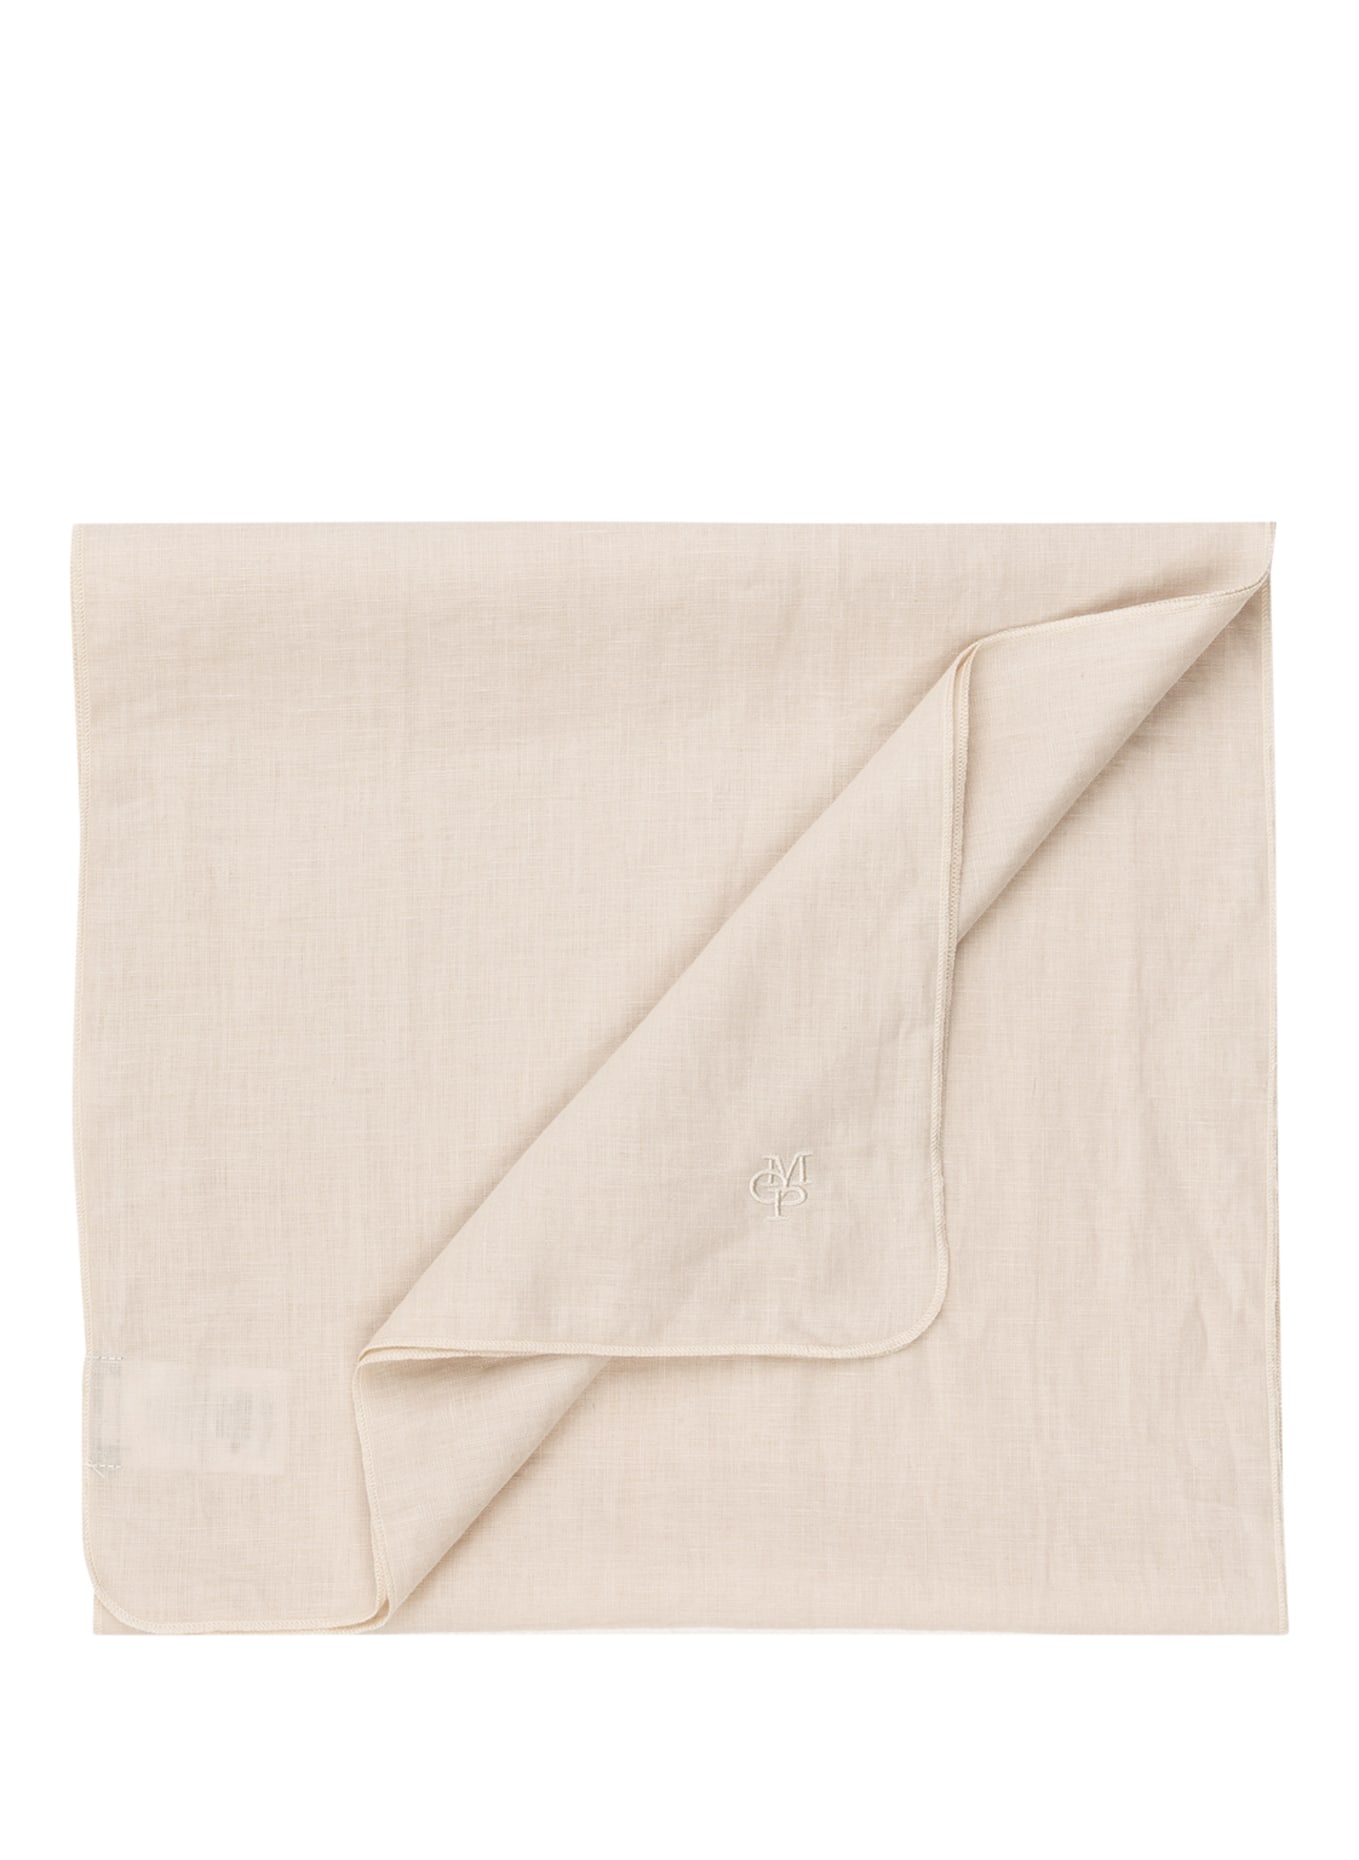 Marc O'Polo Table runner VALKA made of linen , Color: BEIGE(Image null)